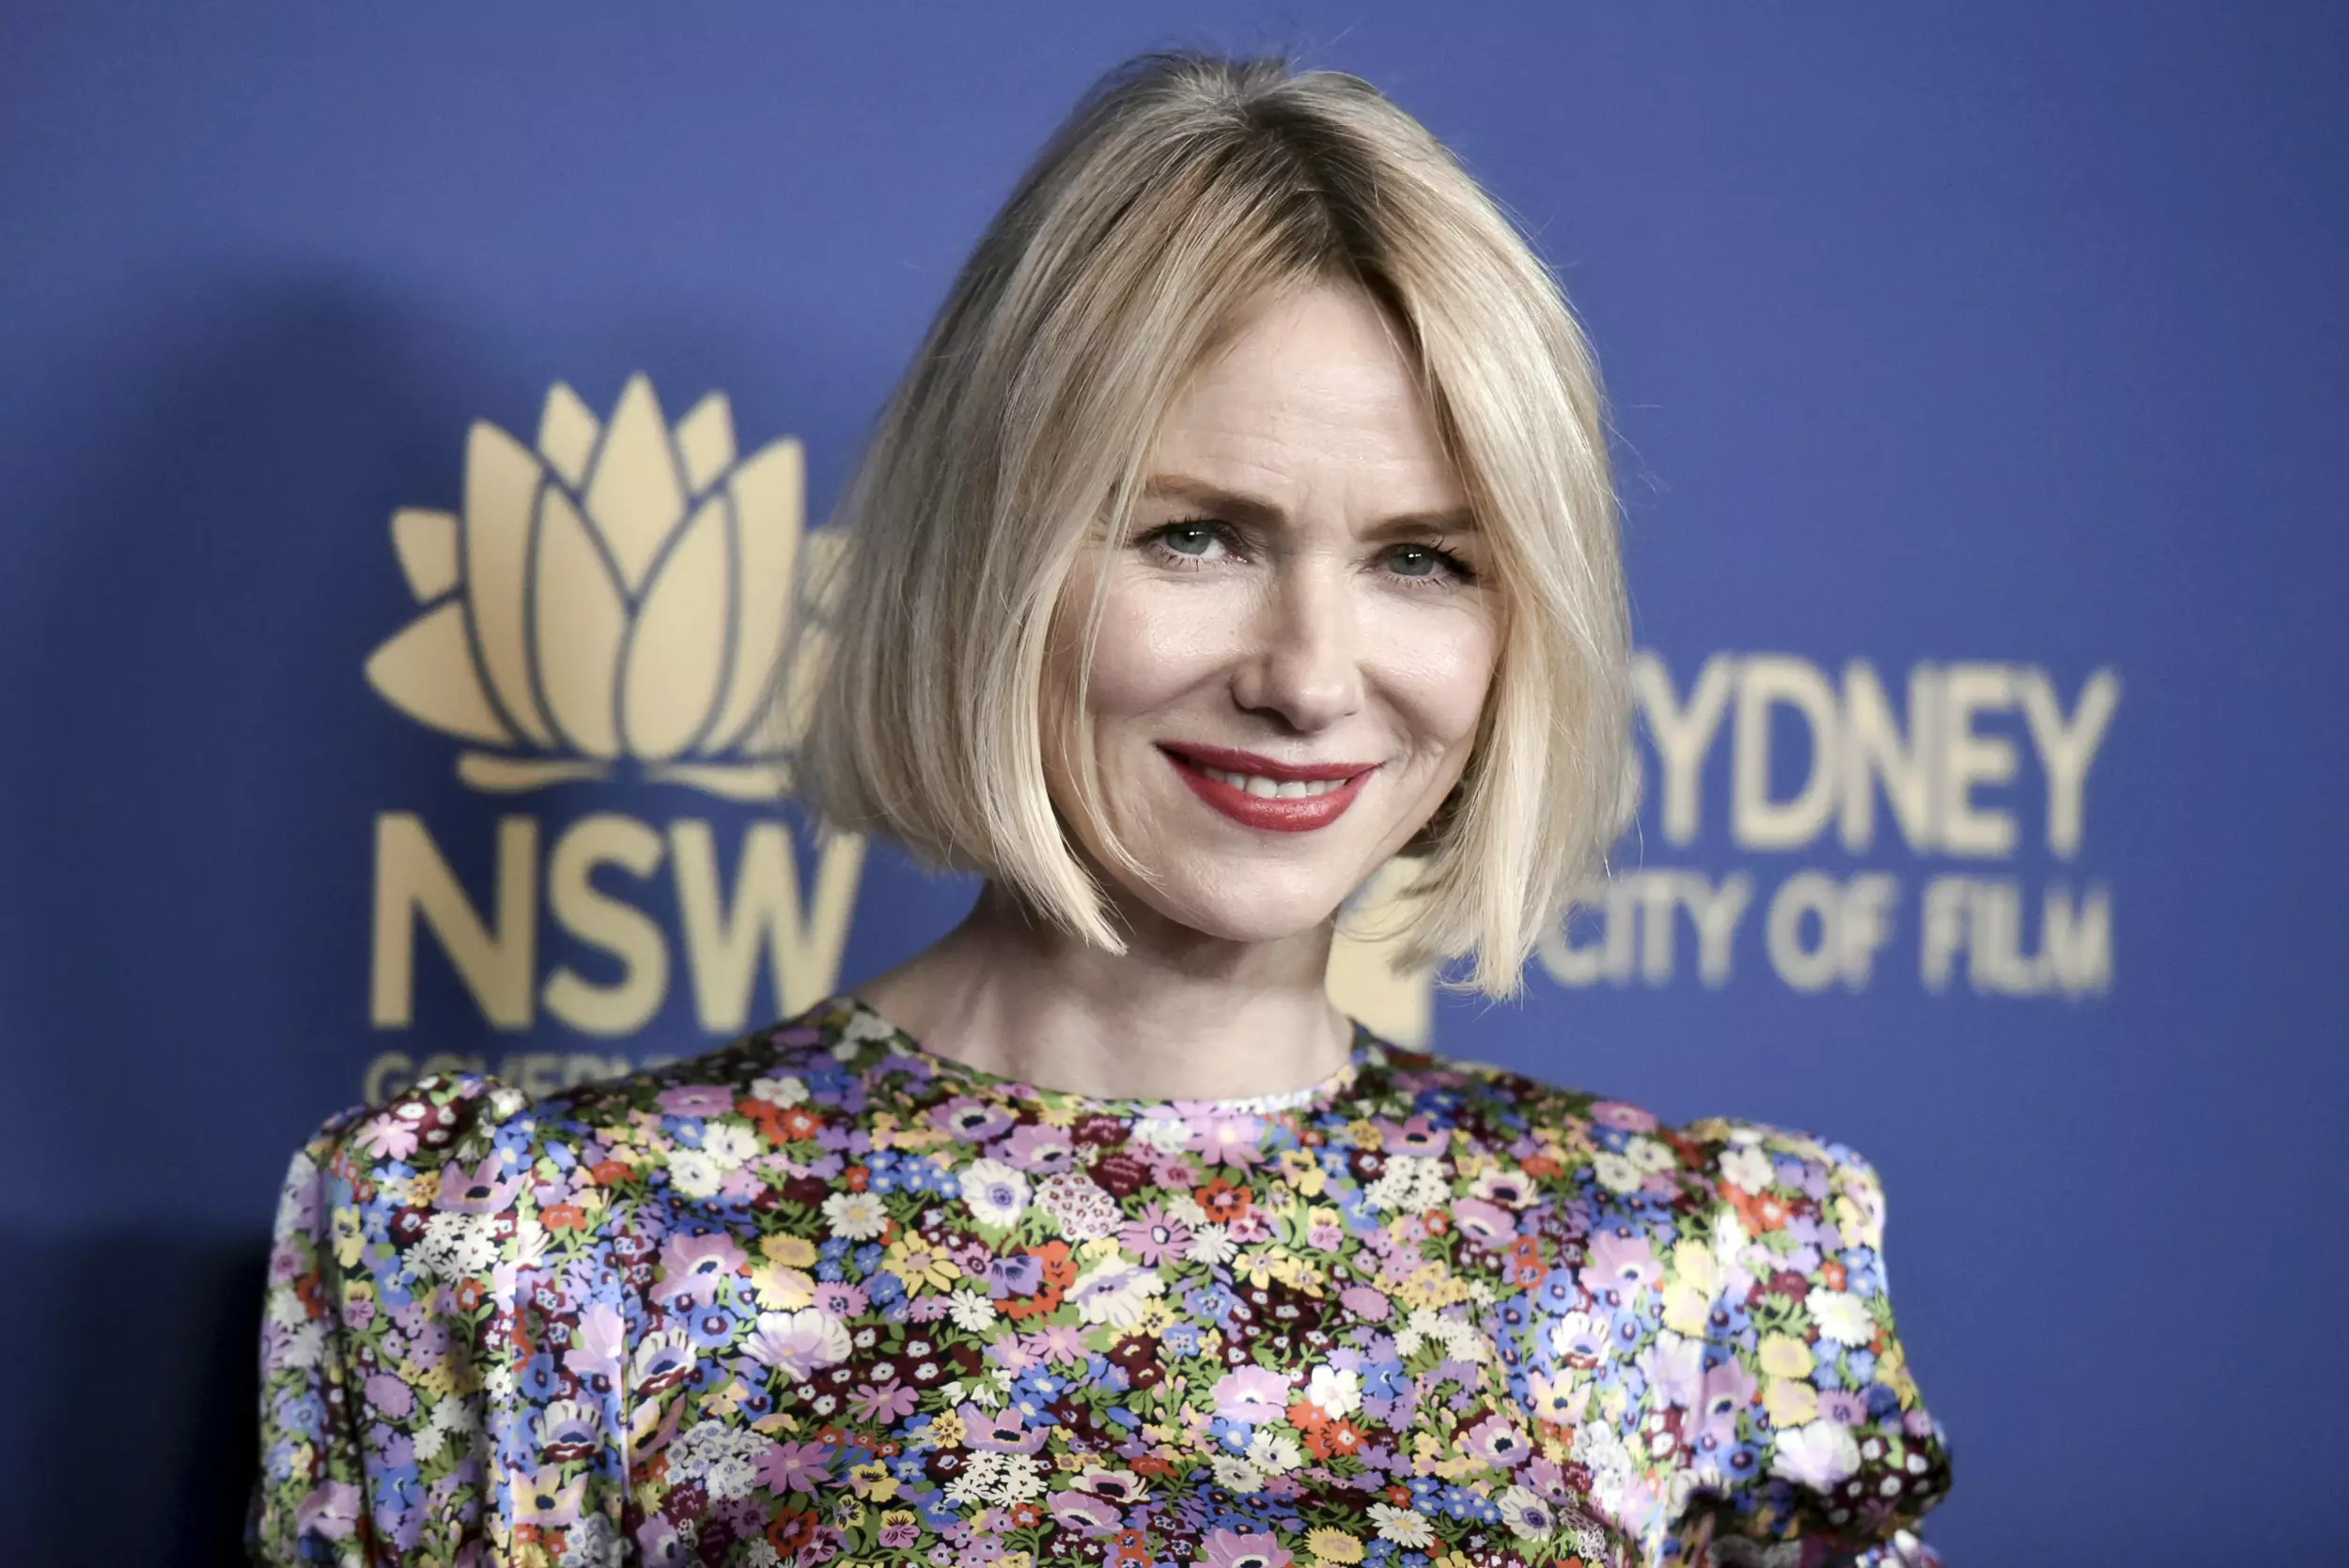 A Game of Thrones prequel series starring Naomi Watts has been dropped by HBO.